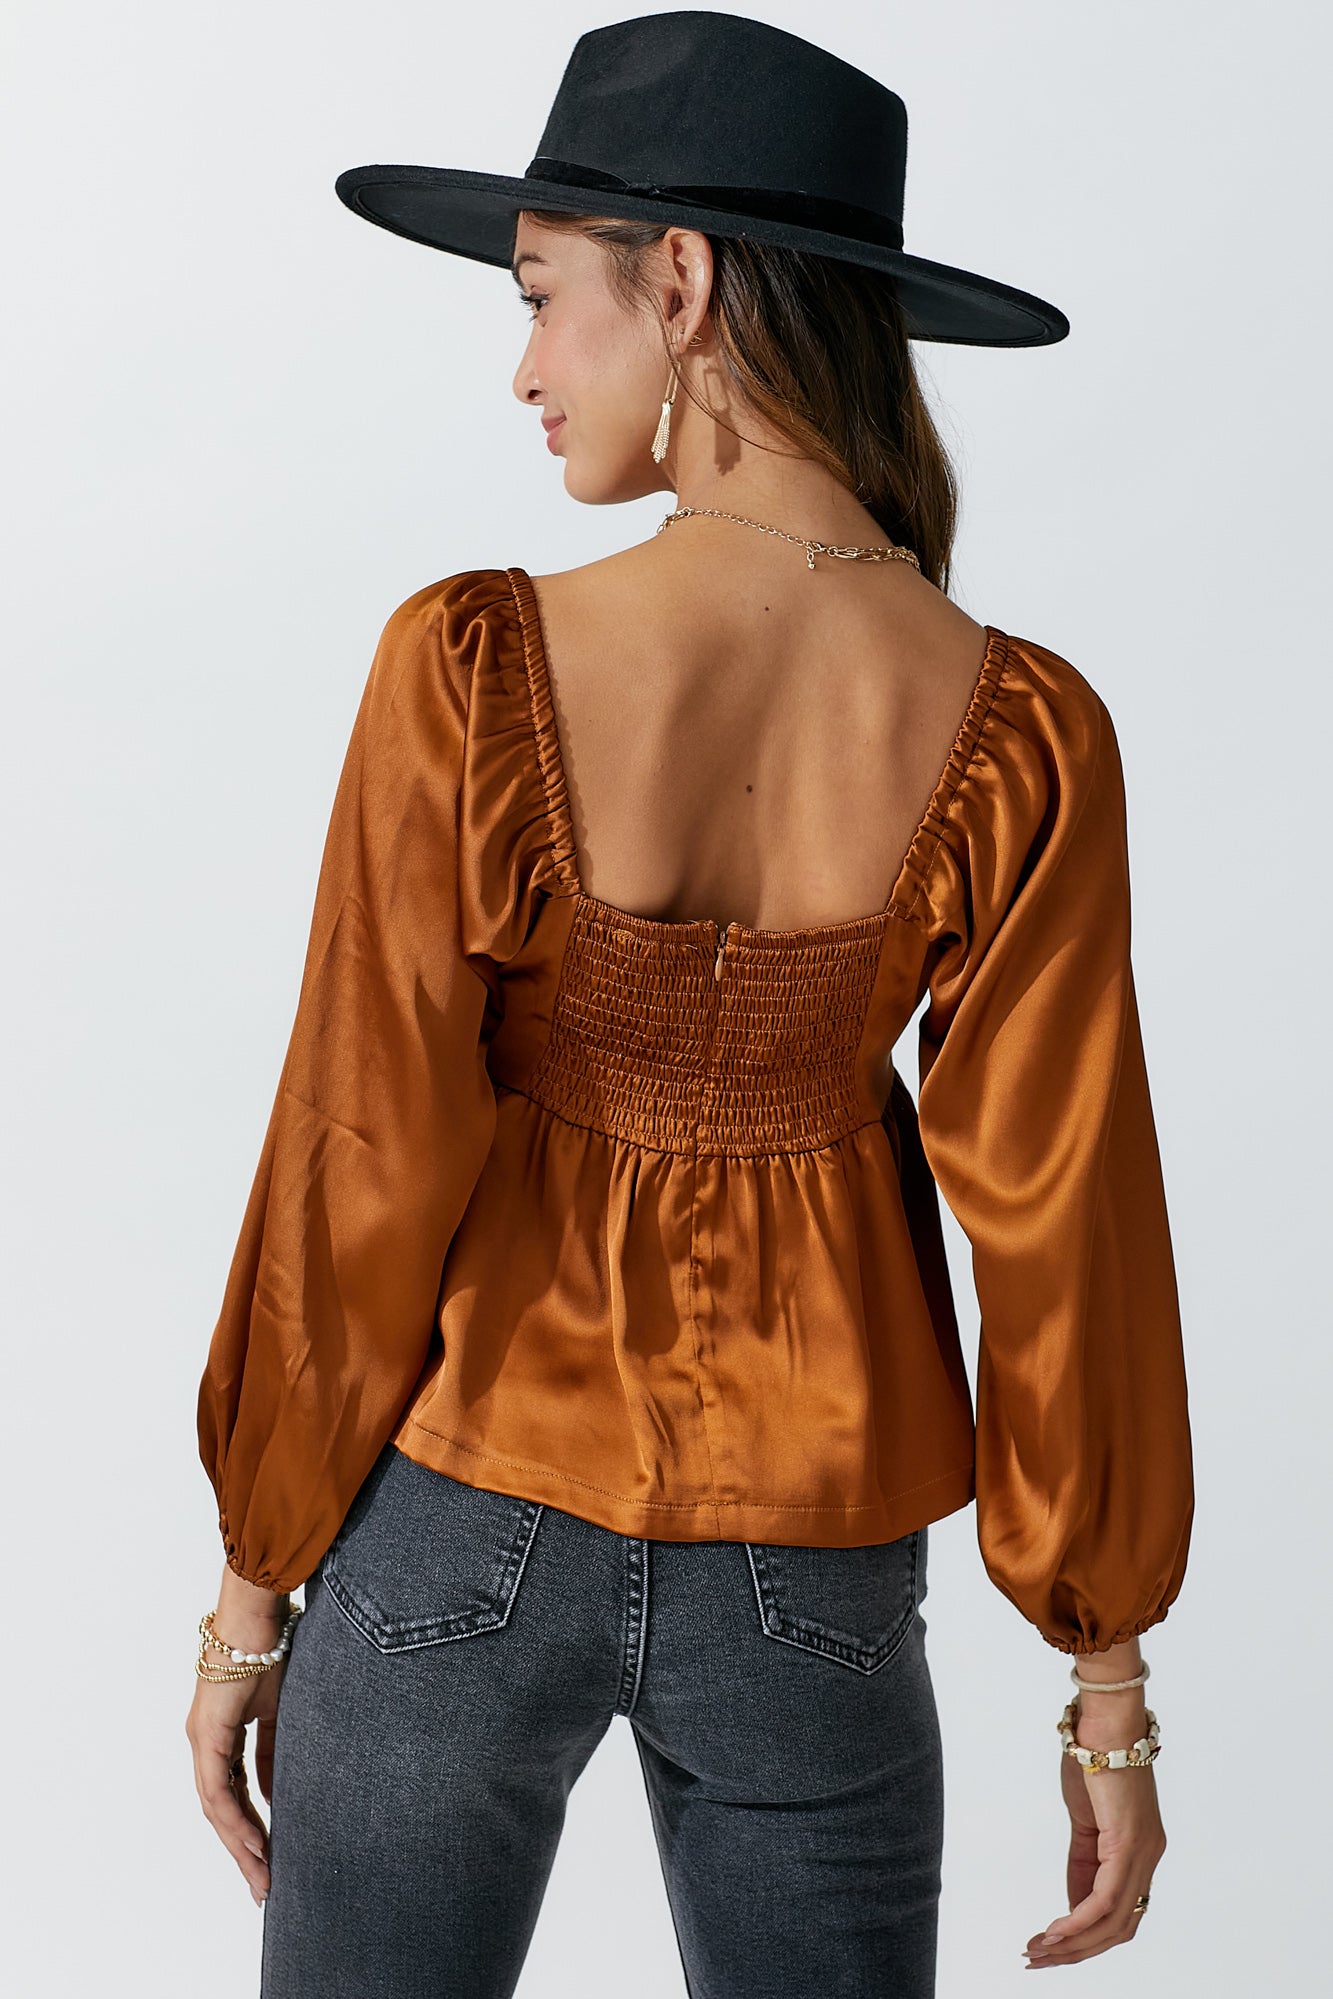 Satin Baby Doll Top